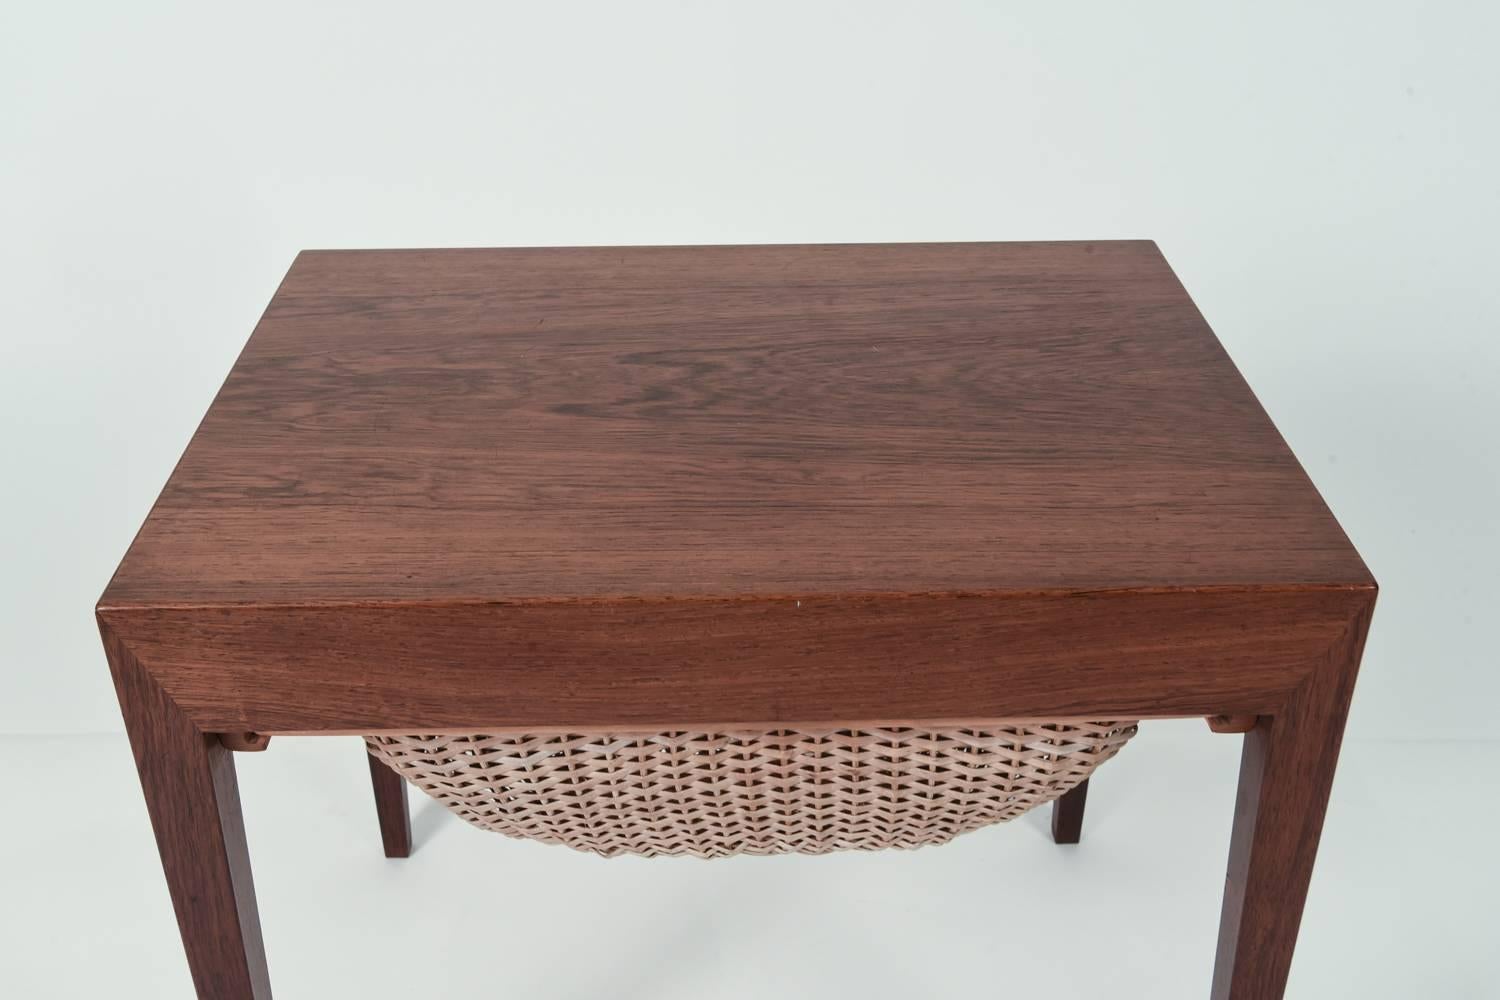 A Danish Mid-Century rosewood sewing table designed by Severin Hansen for Haslev. Features a compartment underneath for storage.